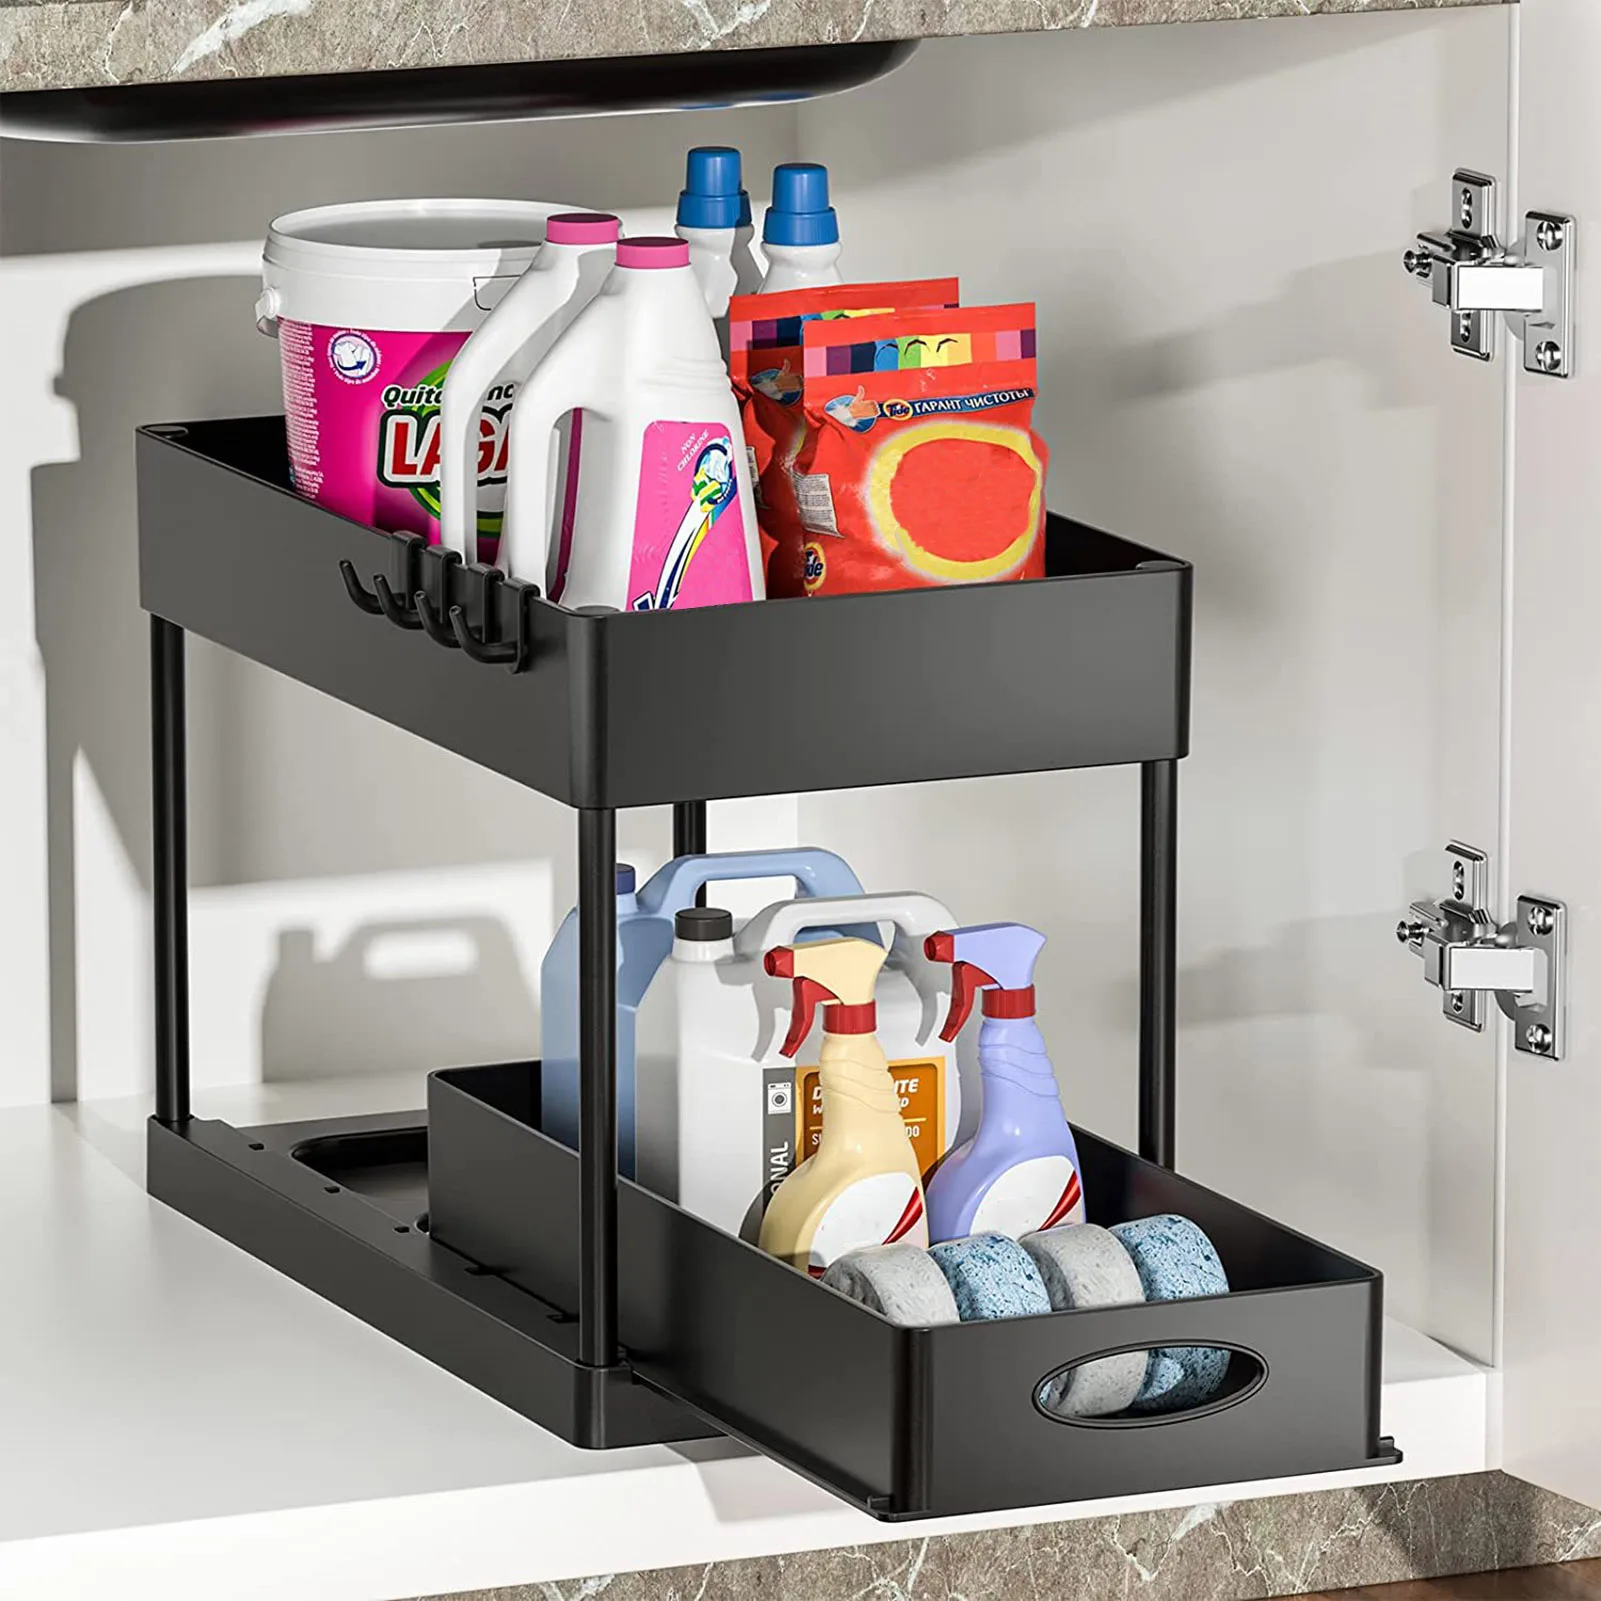 https://ae01.alicdn.com/kf/Se48eff930a8f49c4b21e190cba47b981I/2-Tier-Under-Sink-Storage-for-Bathroom-Kitchen-with-Hooks-Hanging-Cup-The-Bottom-Can-Be.jpg